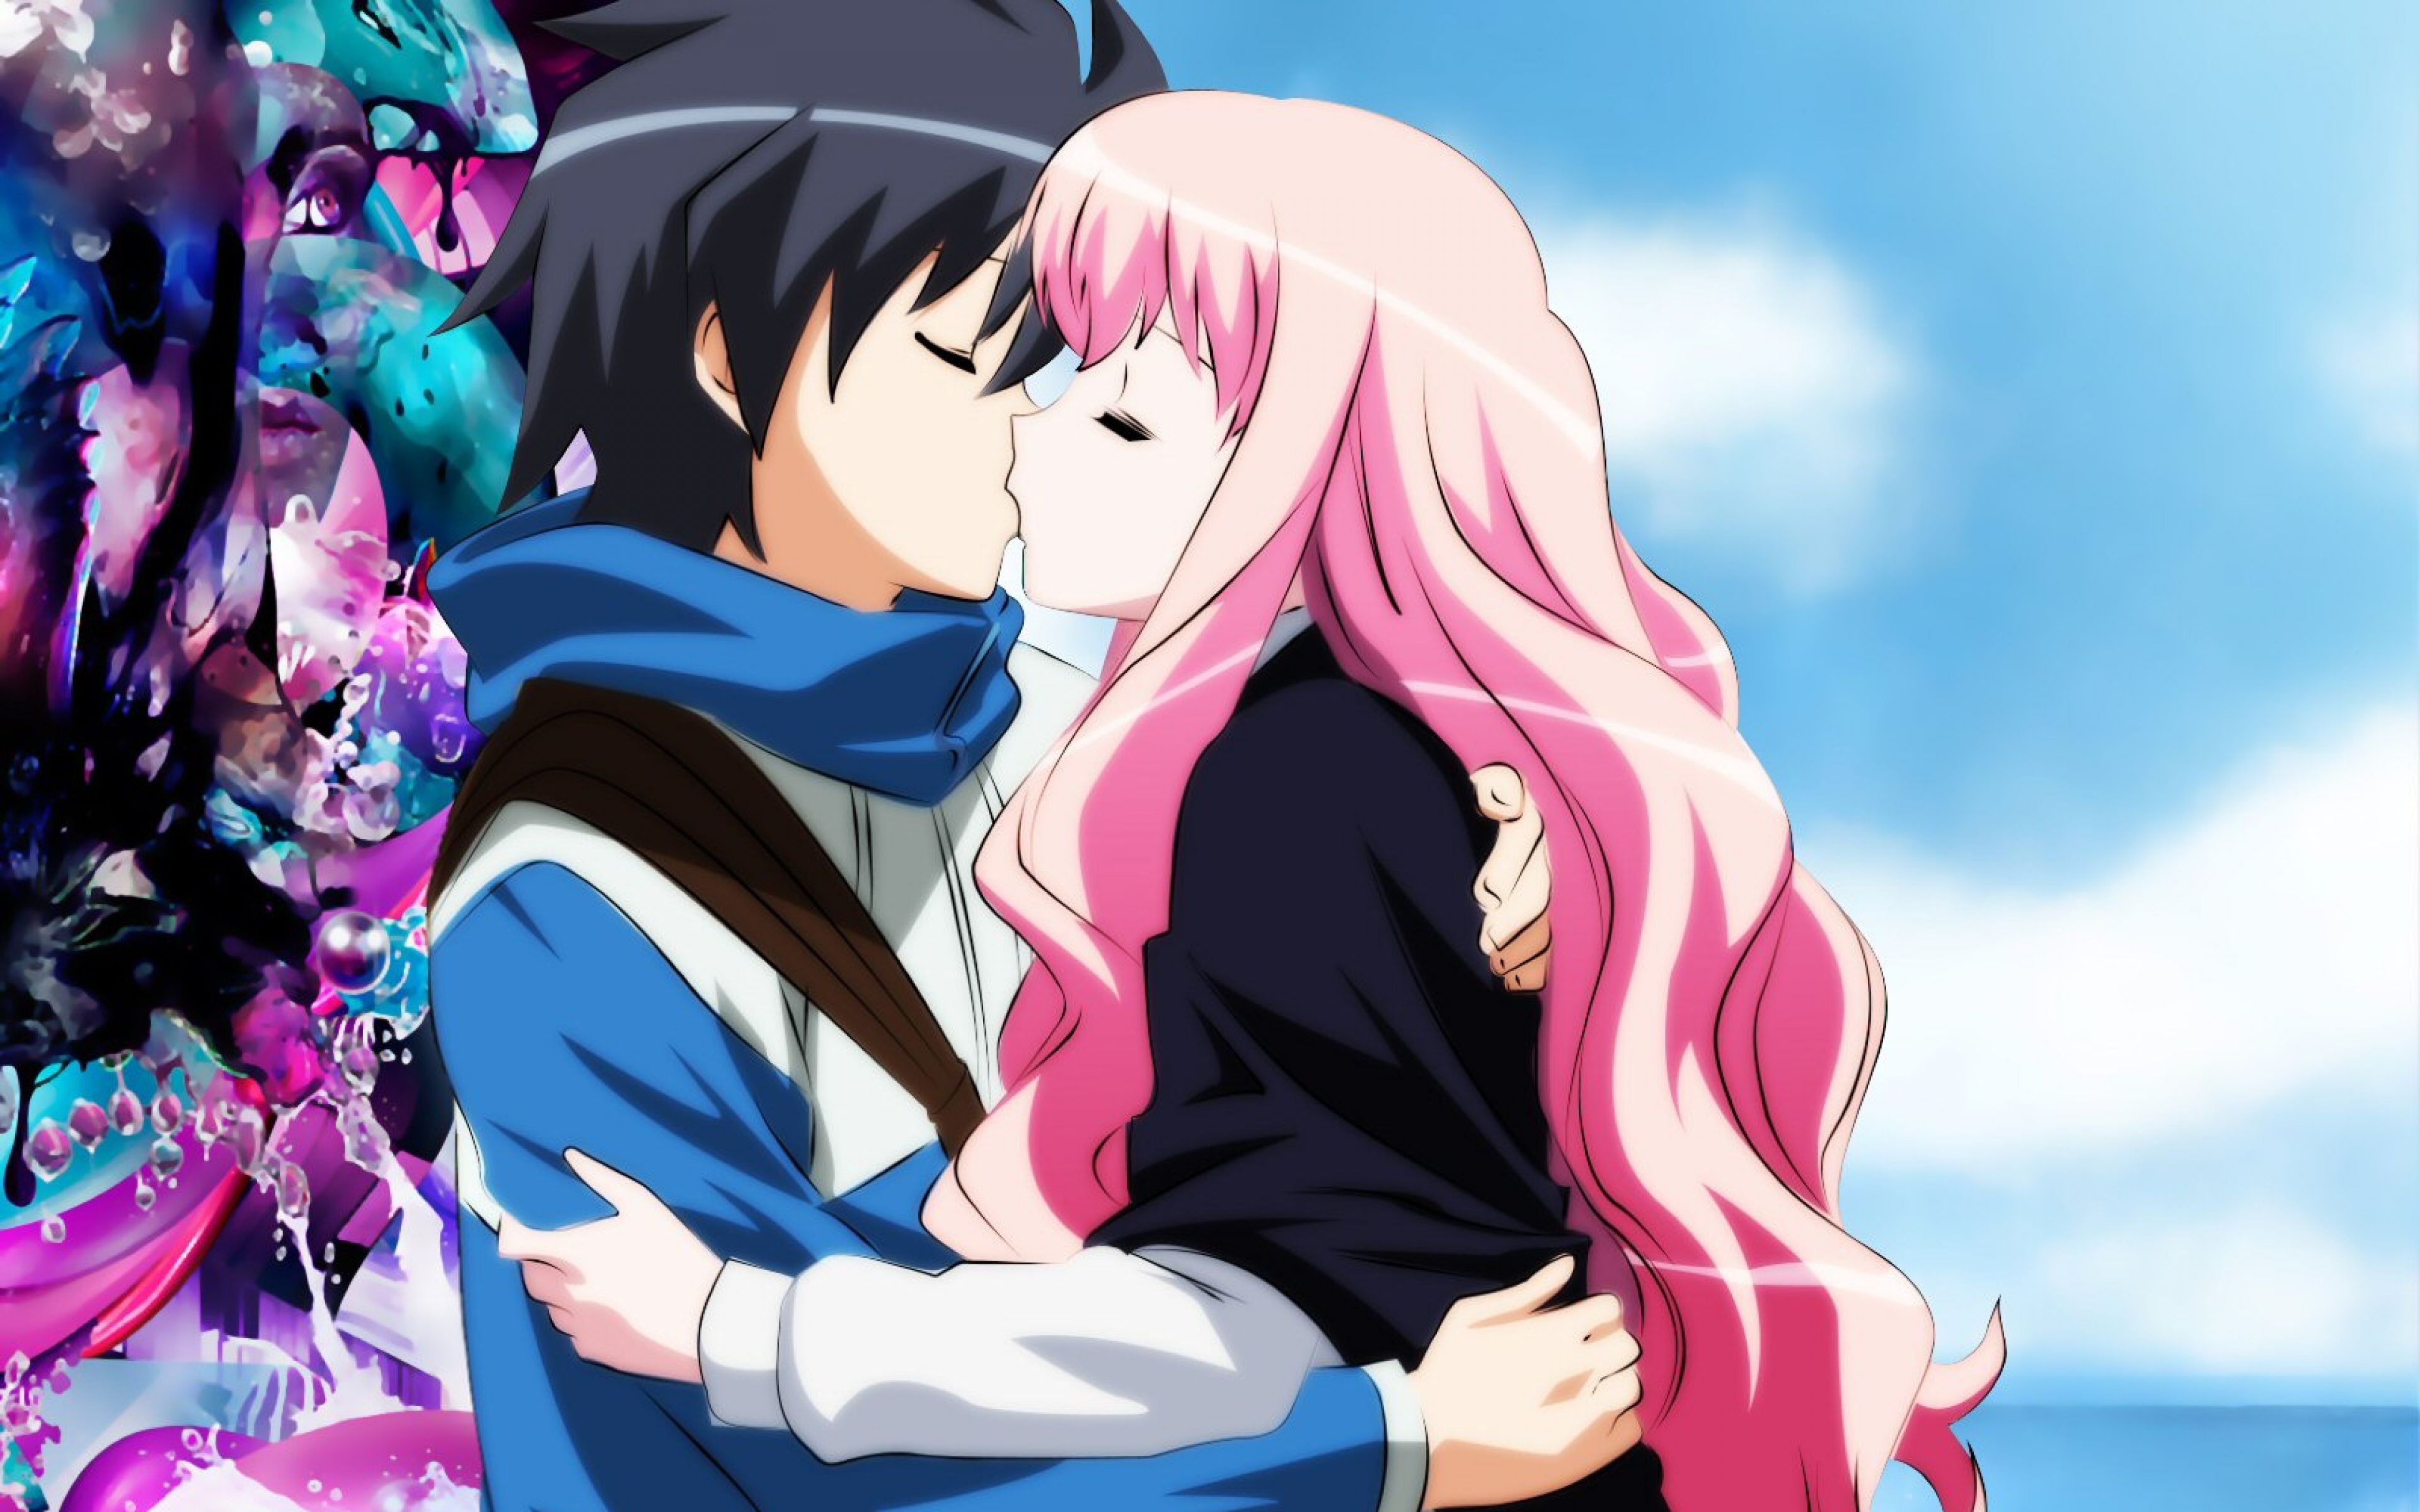 Boy And Girl Anime Kissing Wallpapers Wallpaper Cave 1857